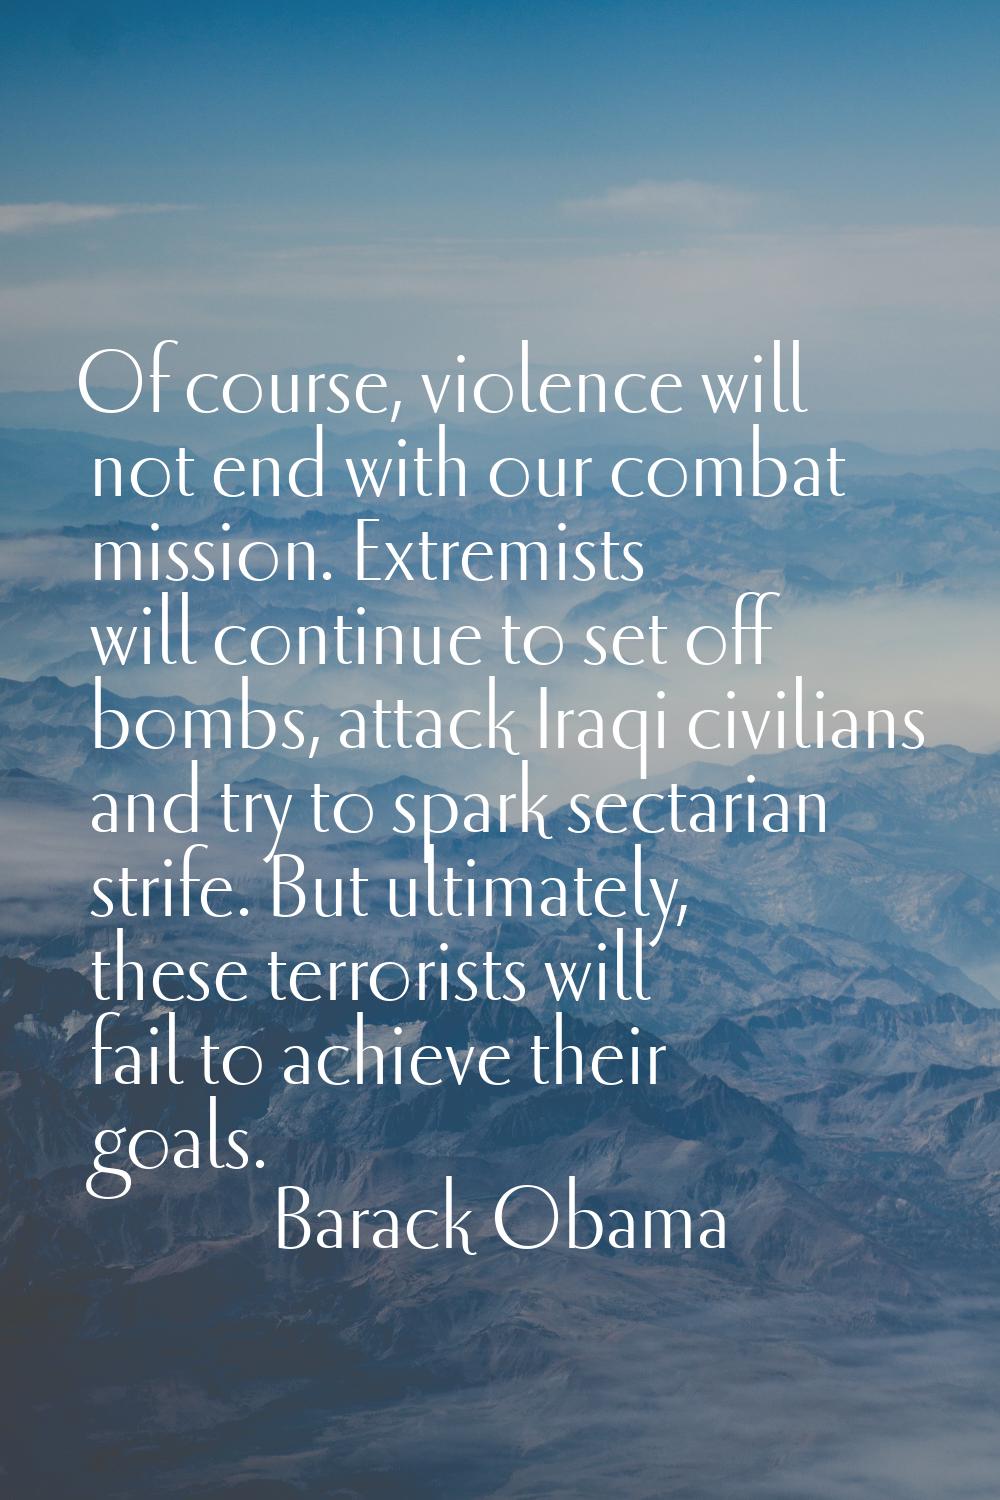 Of course, violence will not end with our combat mission. Extremists will continue to set off bombs